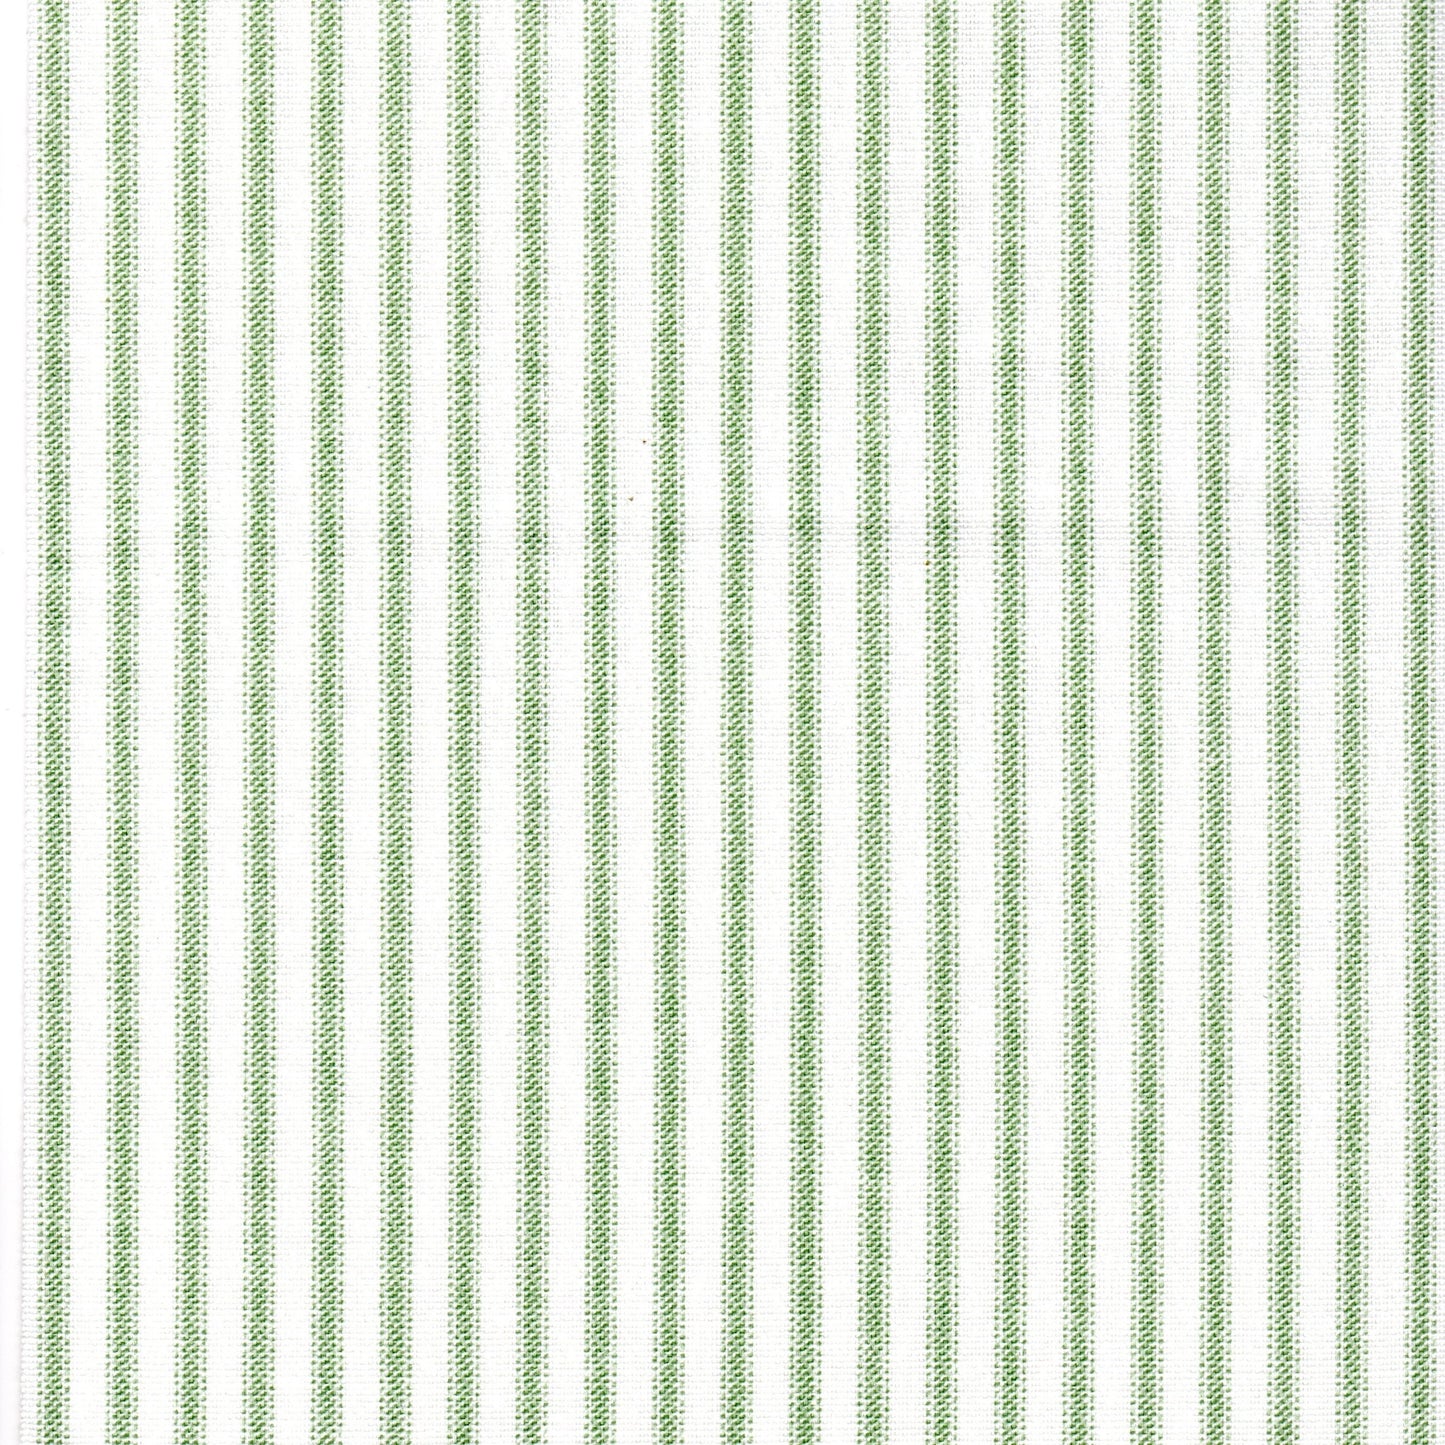 Bed Runner in Classic Sage Green Ticking Stripe on White